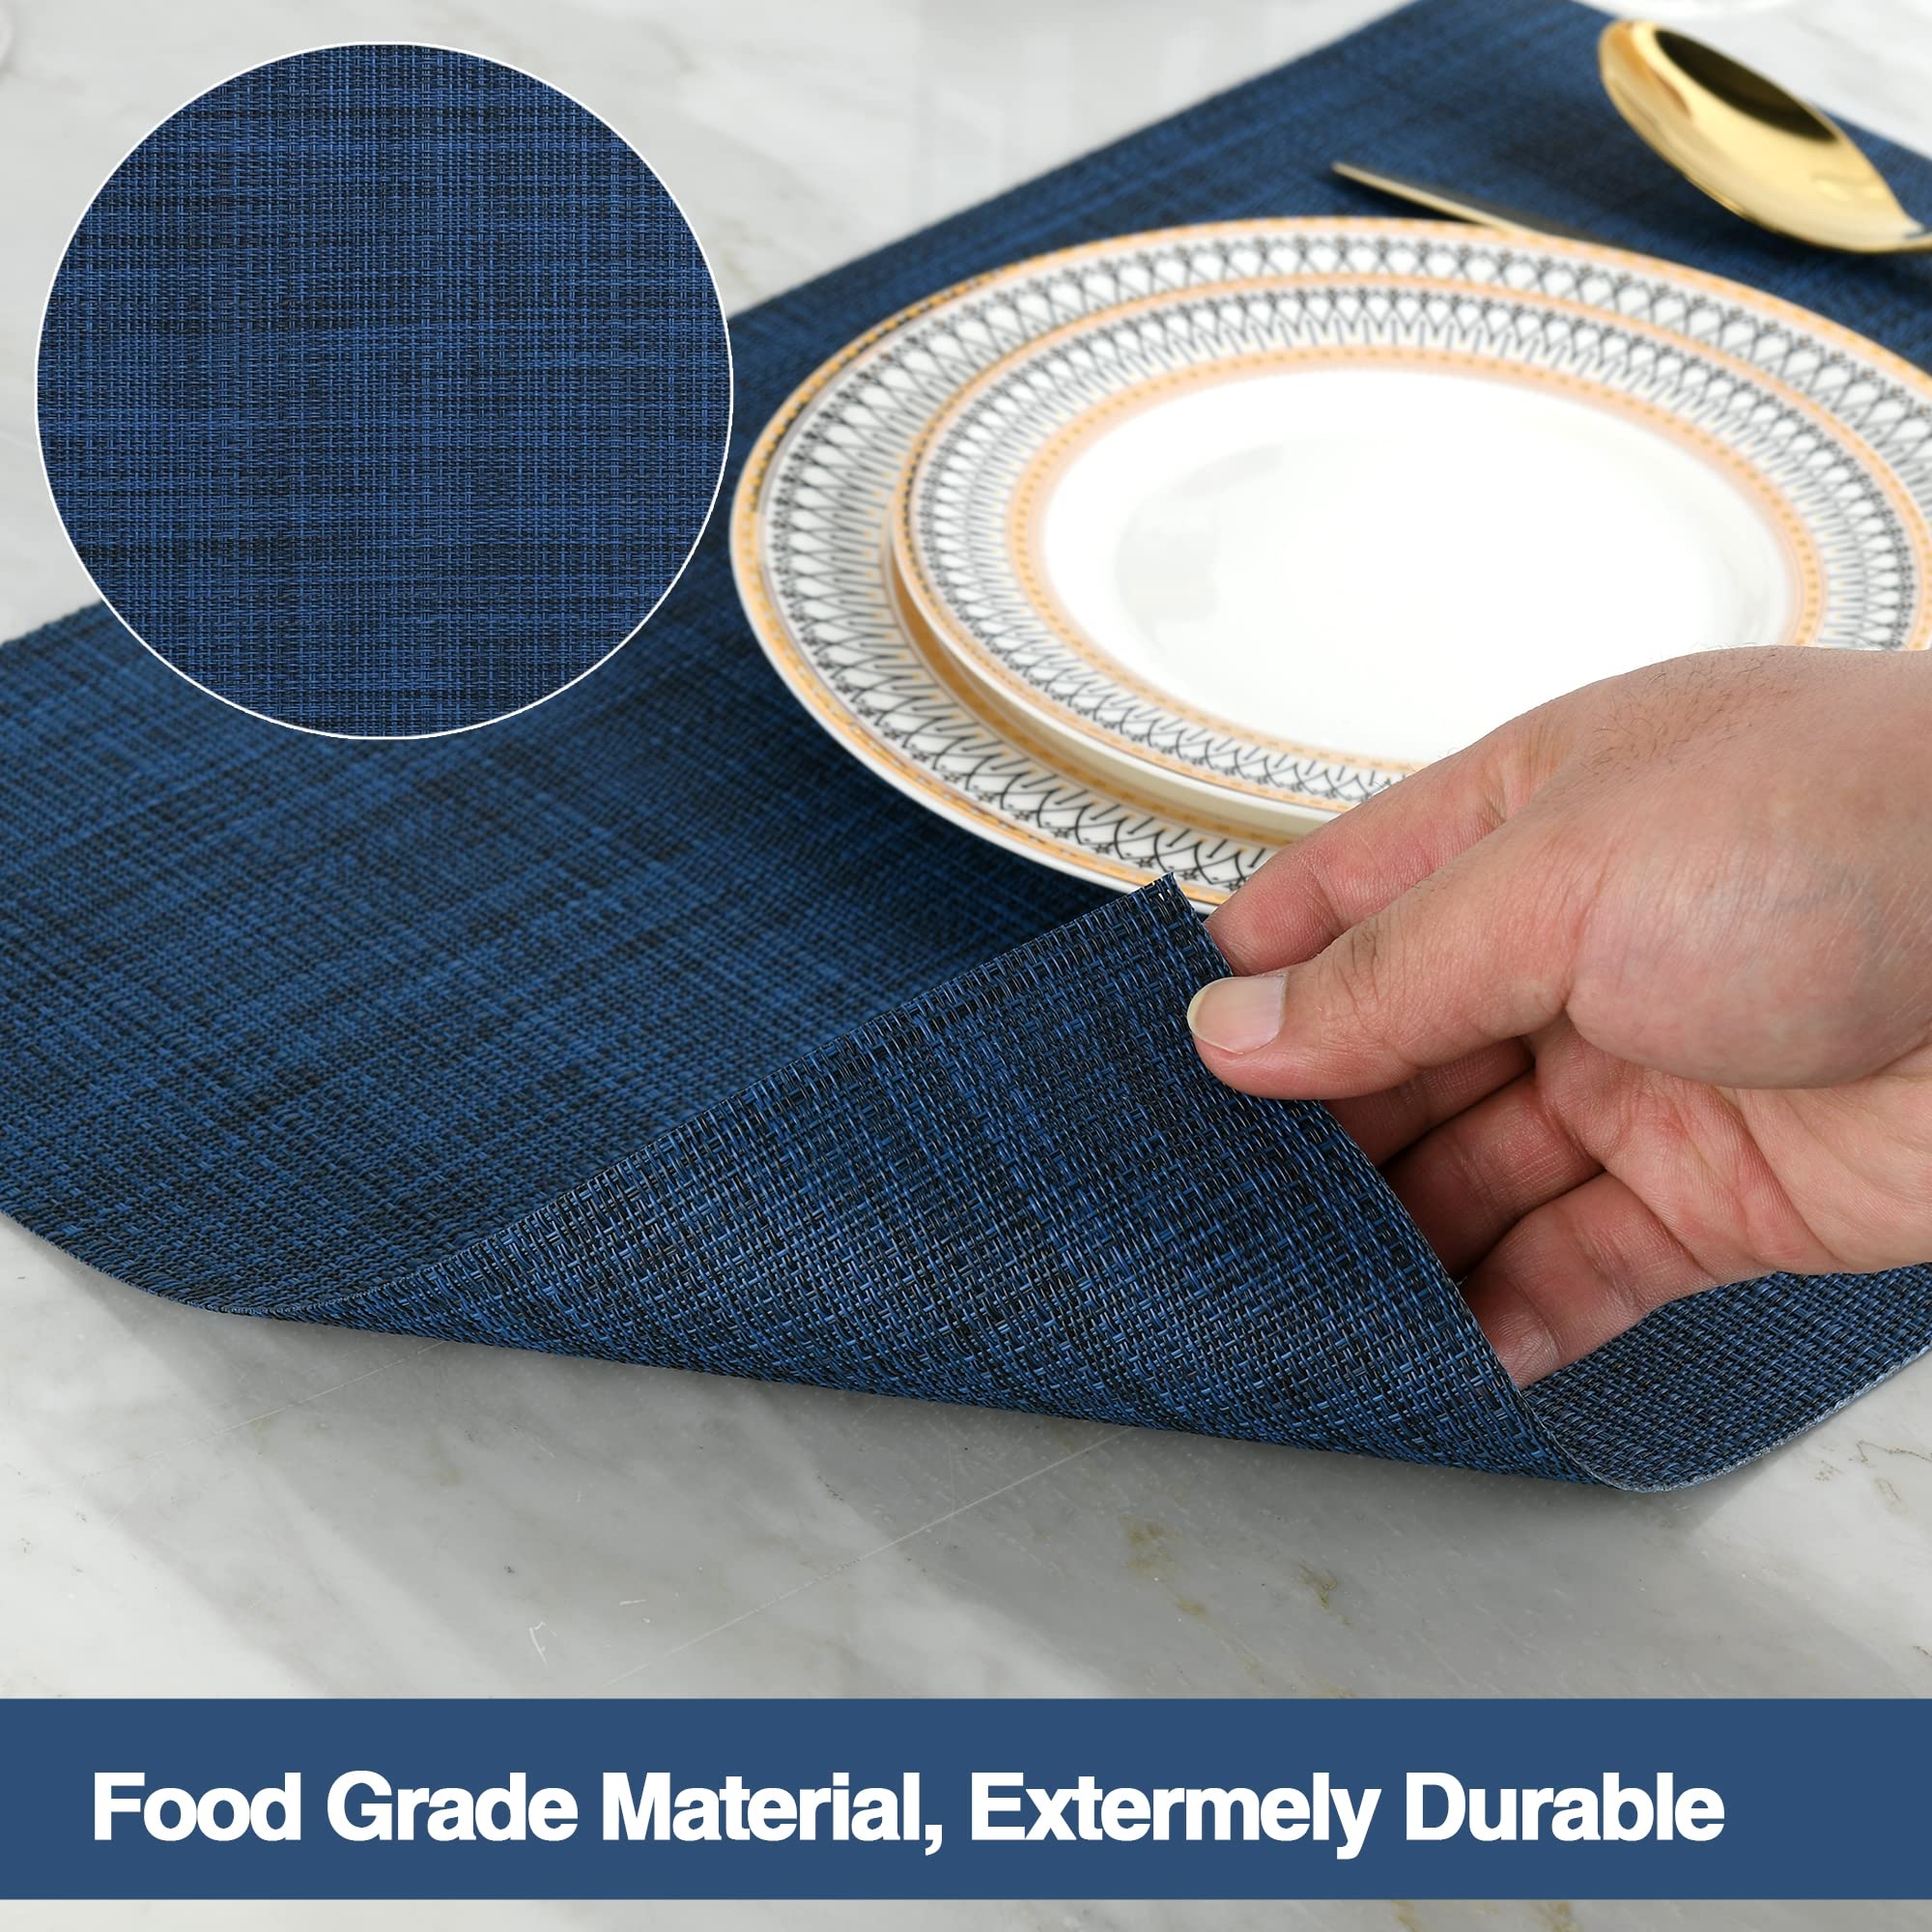 SLKQG Navy Blue Placemats Set of 4 - Easy Clean Washable Vinyl Placemats - Wipeable Heat Resistant Table Mats for Dining Table - 17x12 Inch (Navy Blue, 4)